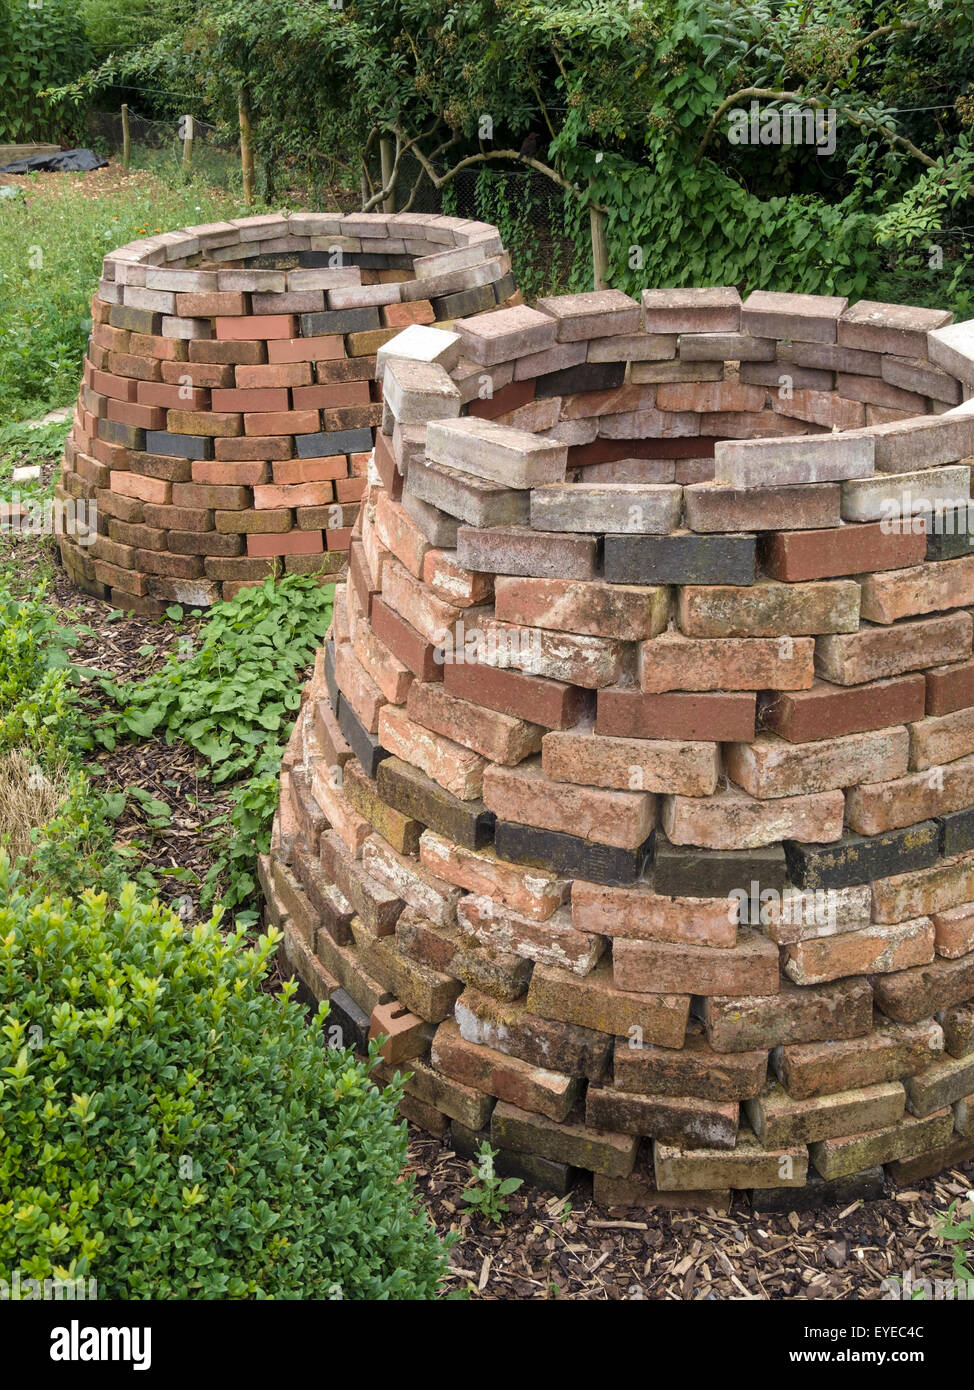 Old Victorian style brick compost bins, Barnsdale Gardens, England, UK. Stock Photo